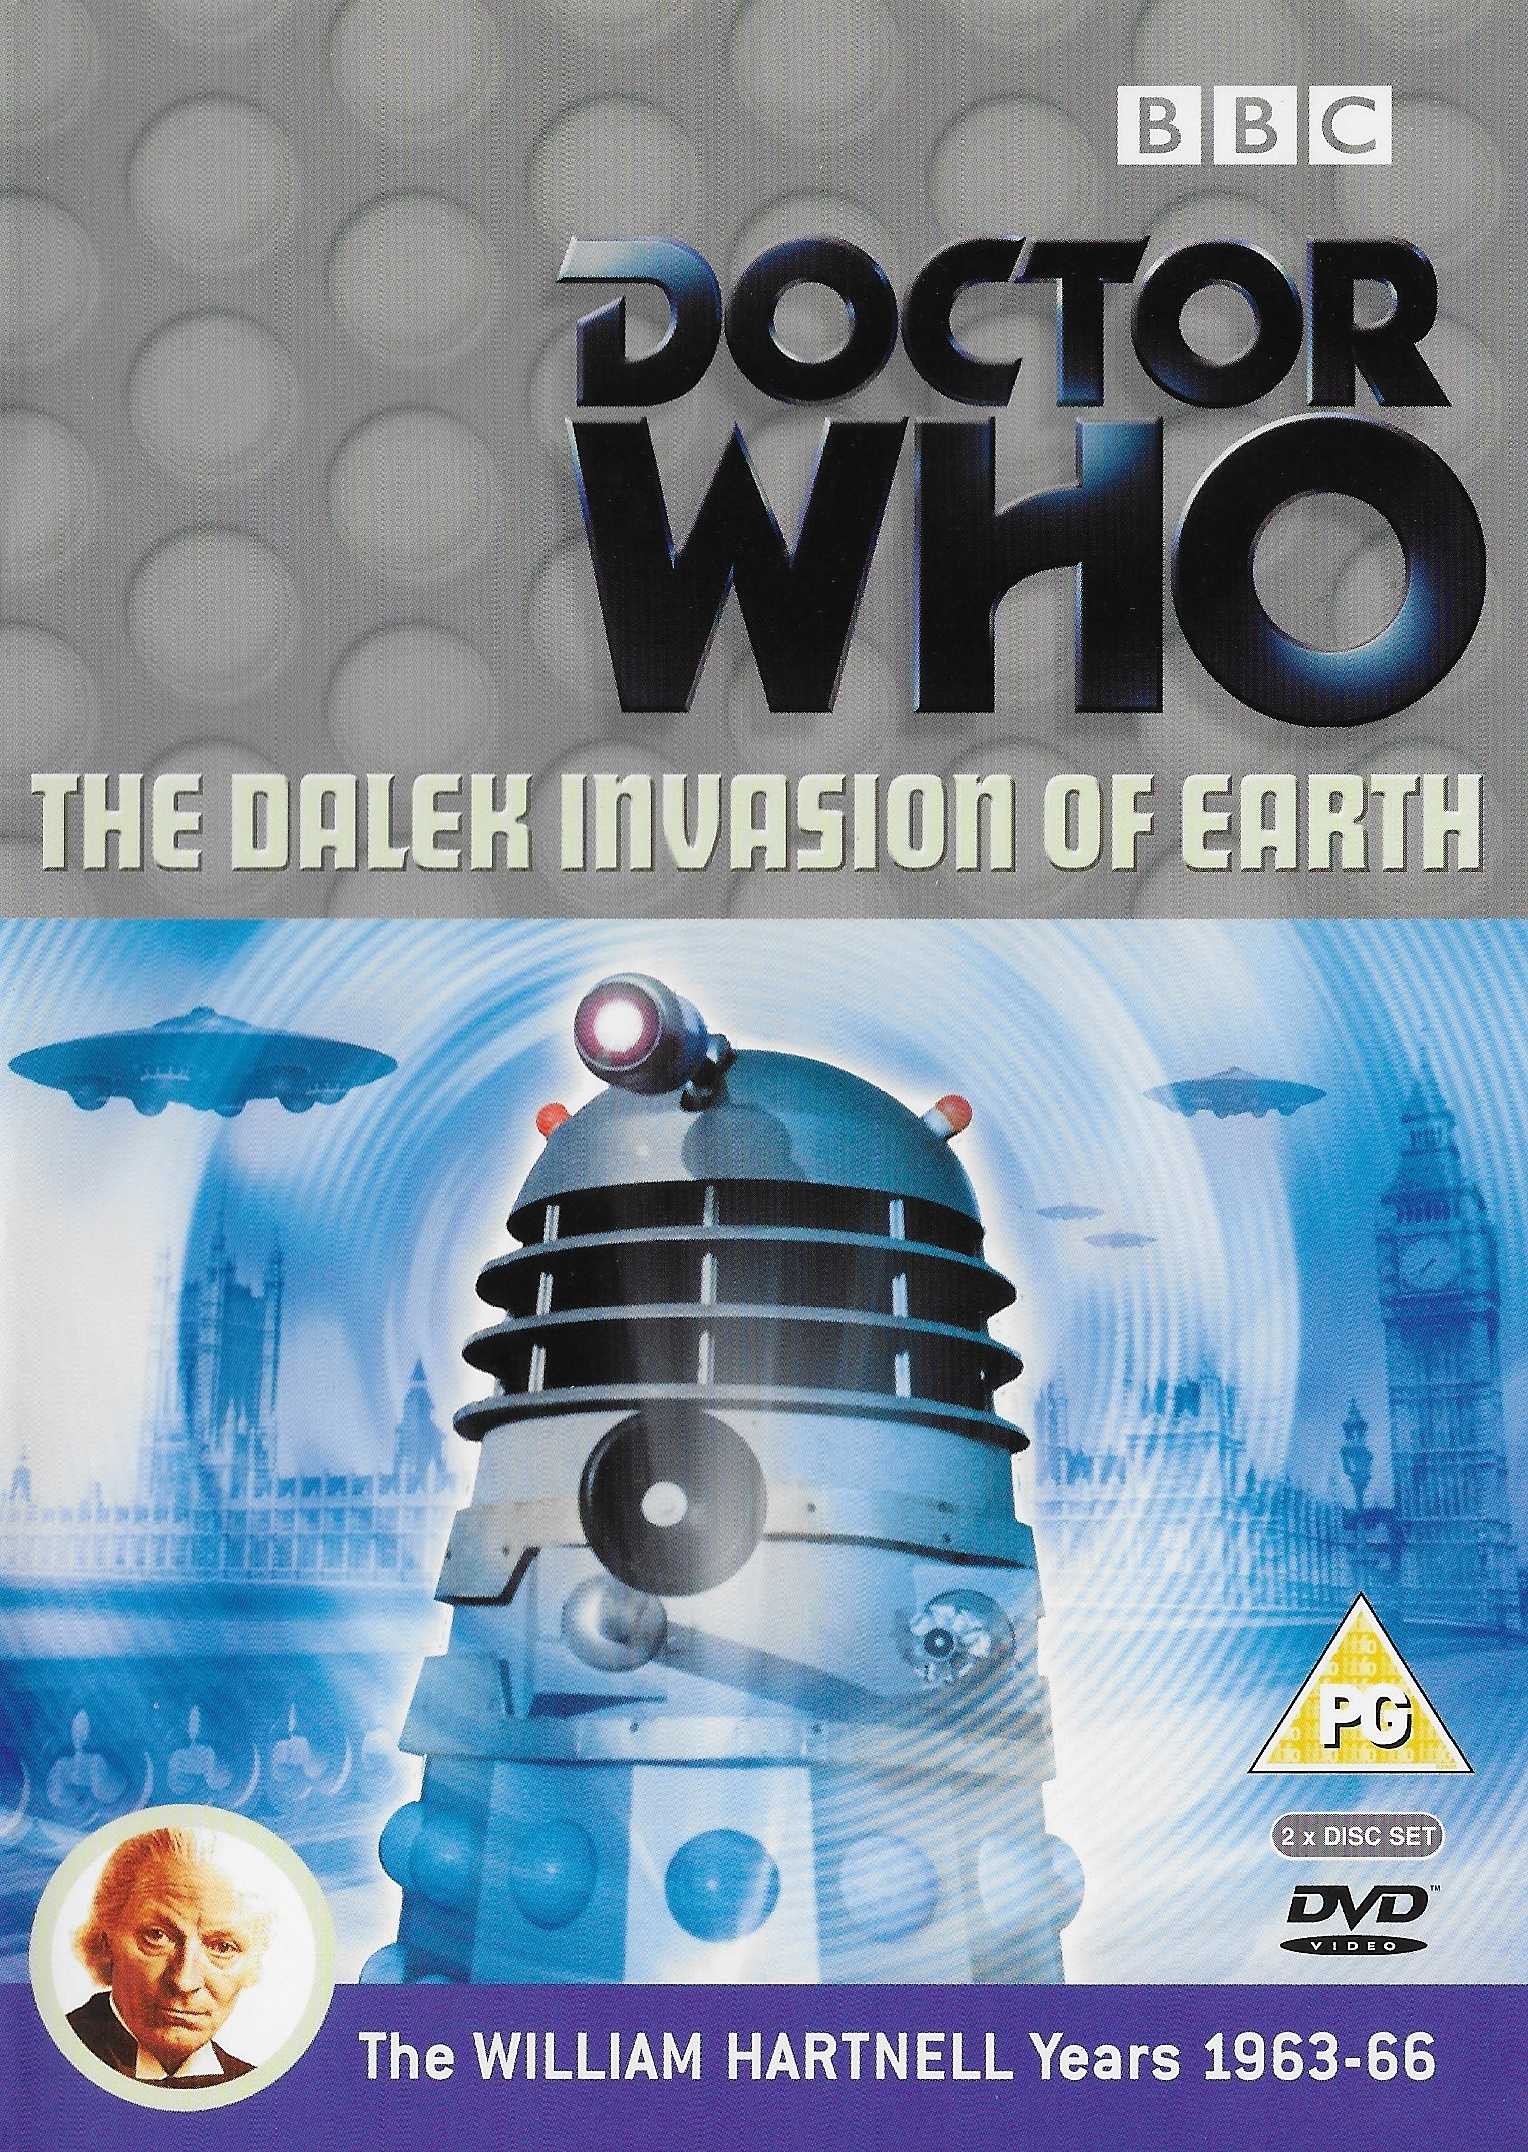 Picture of BBCDVD 1156 Doctor Who - The Dalek invasion of Earth by artist Terry Nation from the BBC dvds - Records and Tapes library